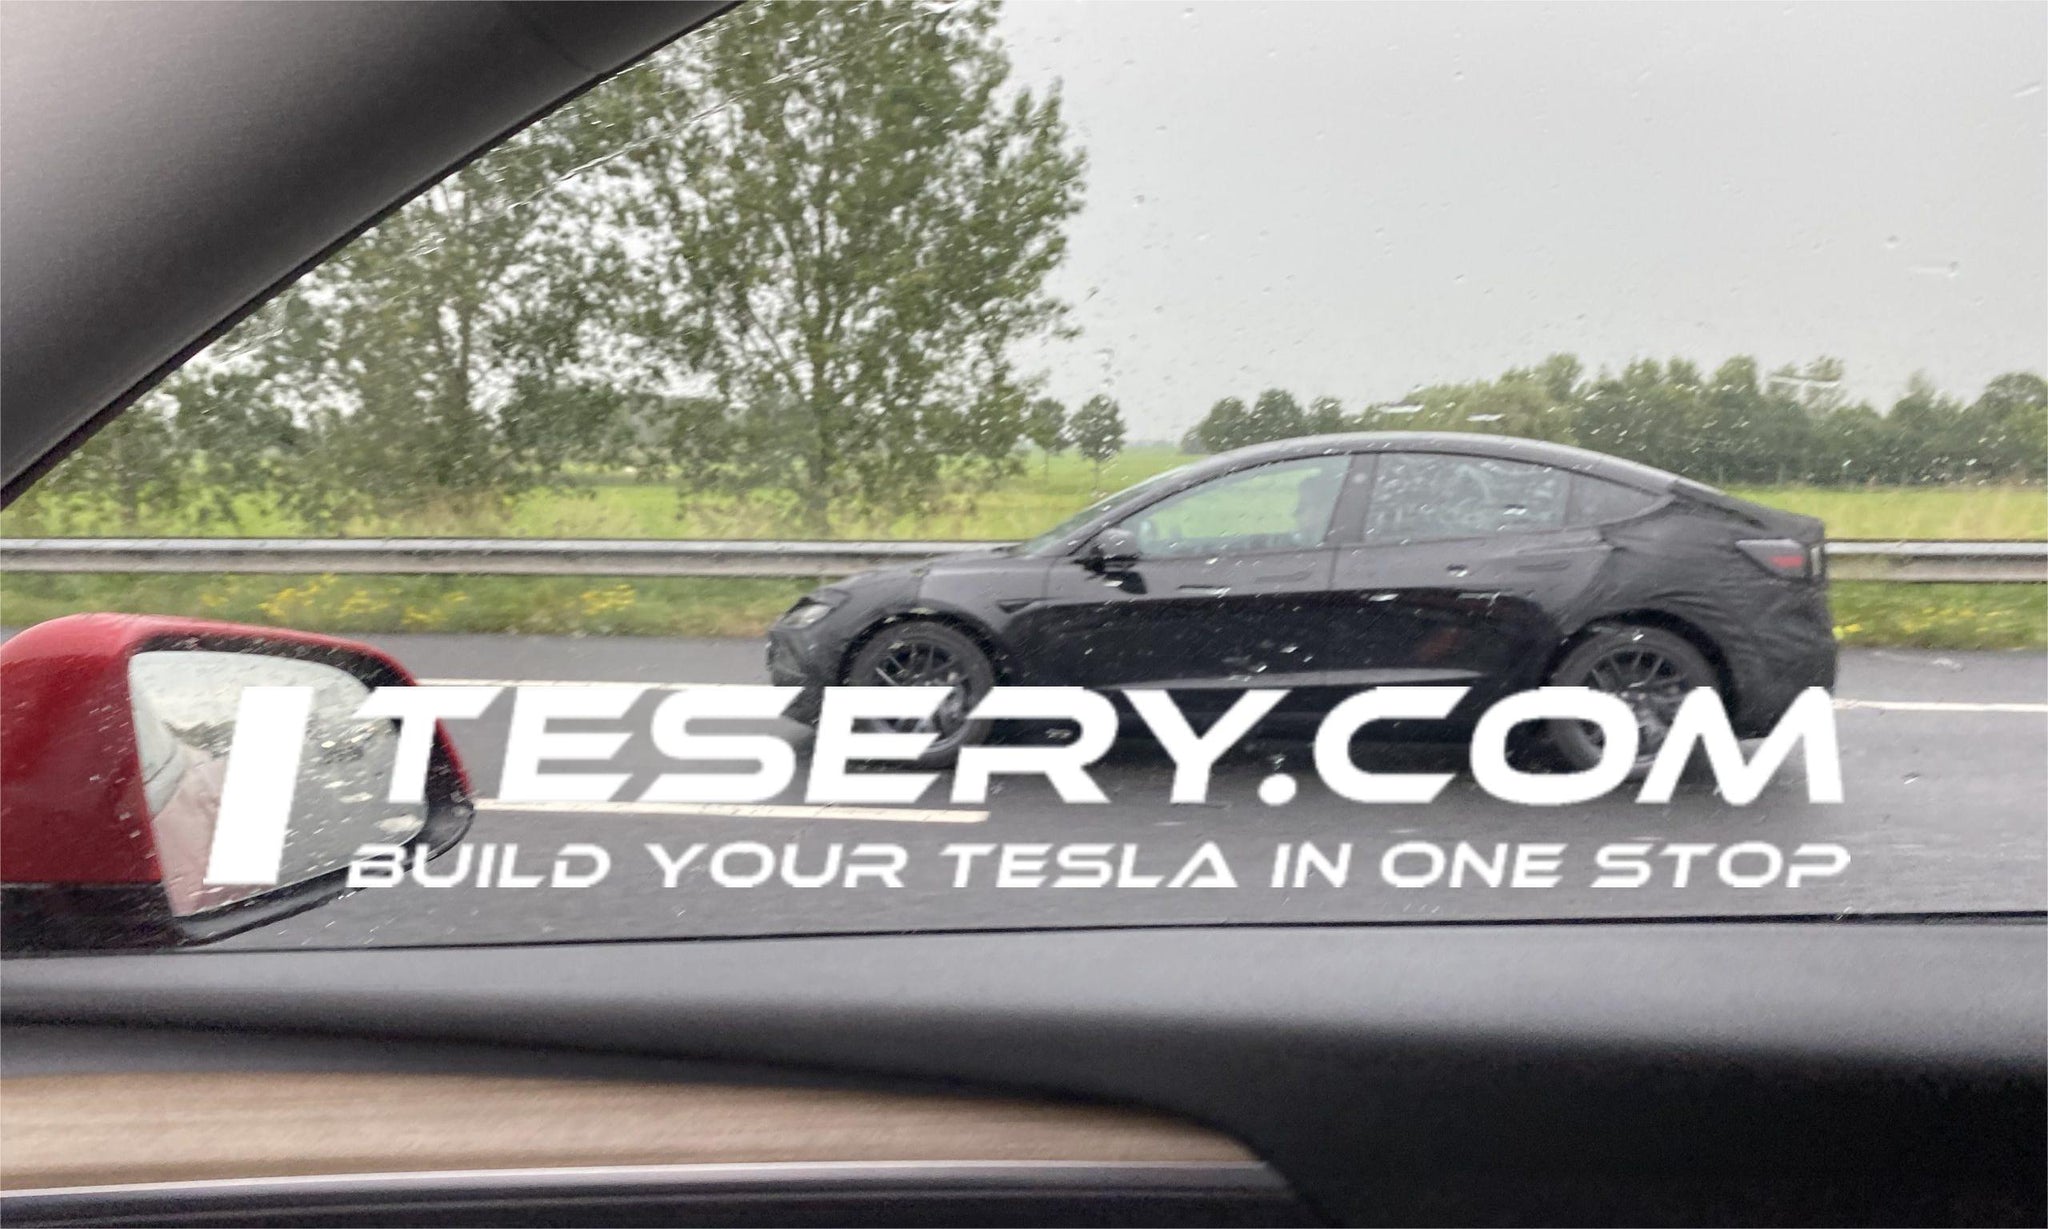 Tesla's New Model 3 Highland Spotted in Europe, Hinting at Imminent International Launch - Tesery Official Store